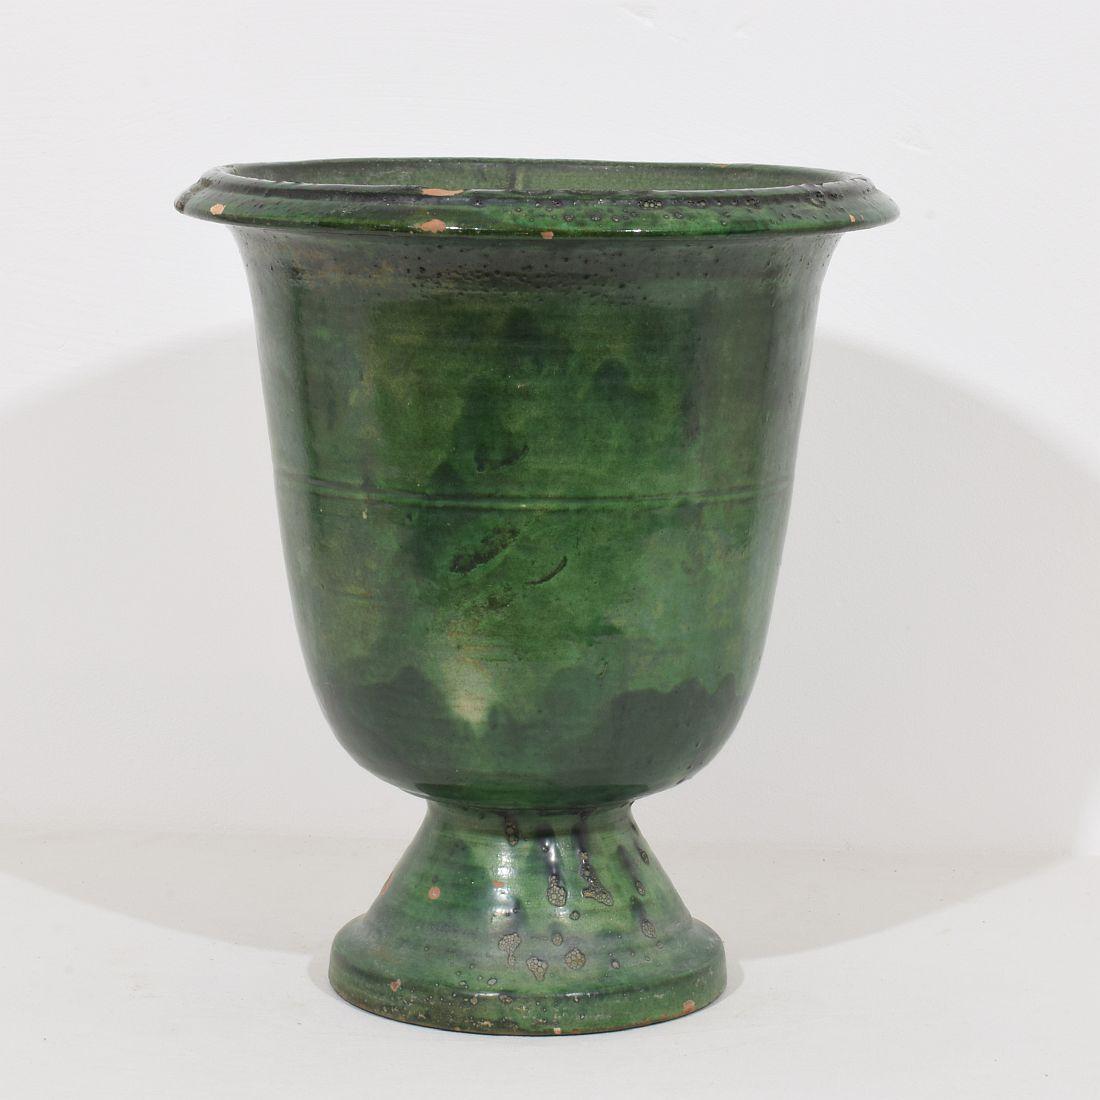 French Provincial French 19th Century Green Glazed Earthenware Castelnaudary Planter / Vase For Sale